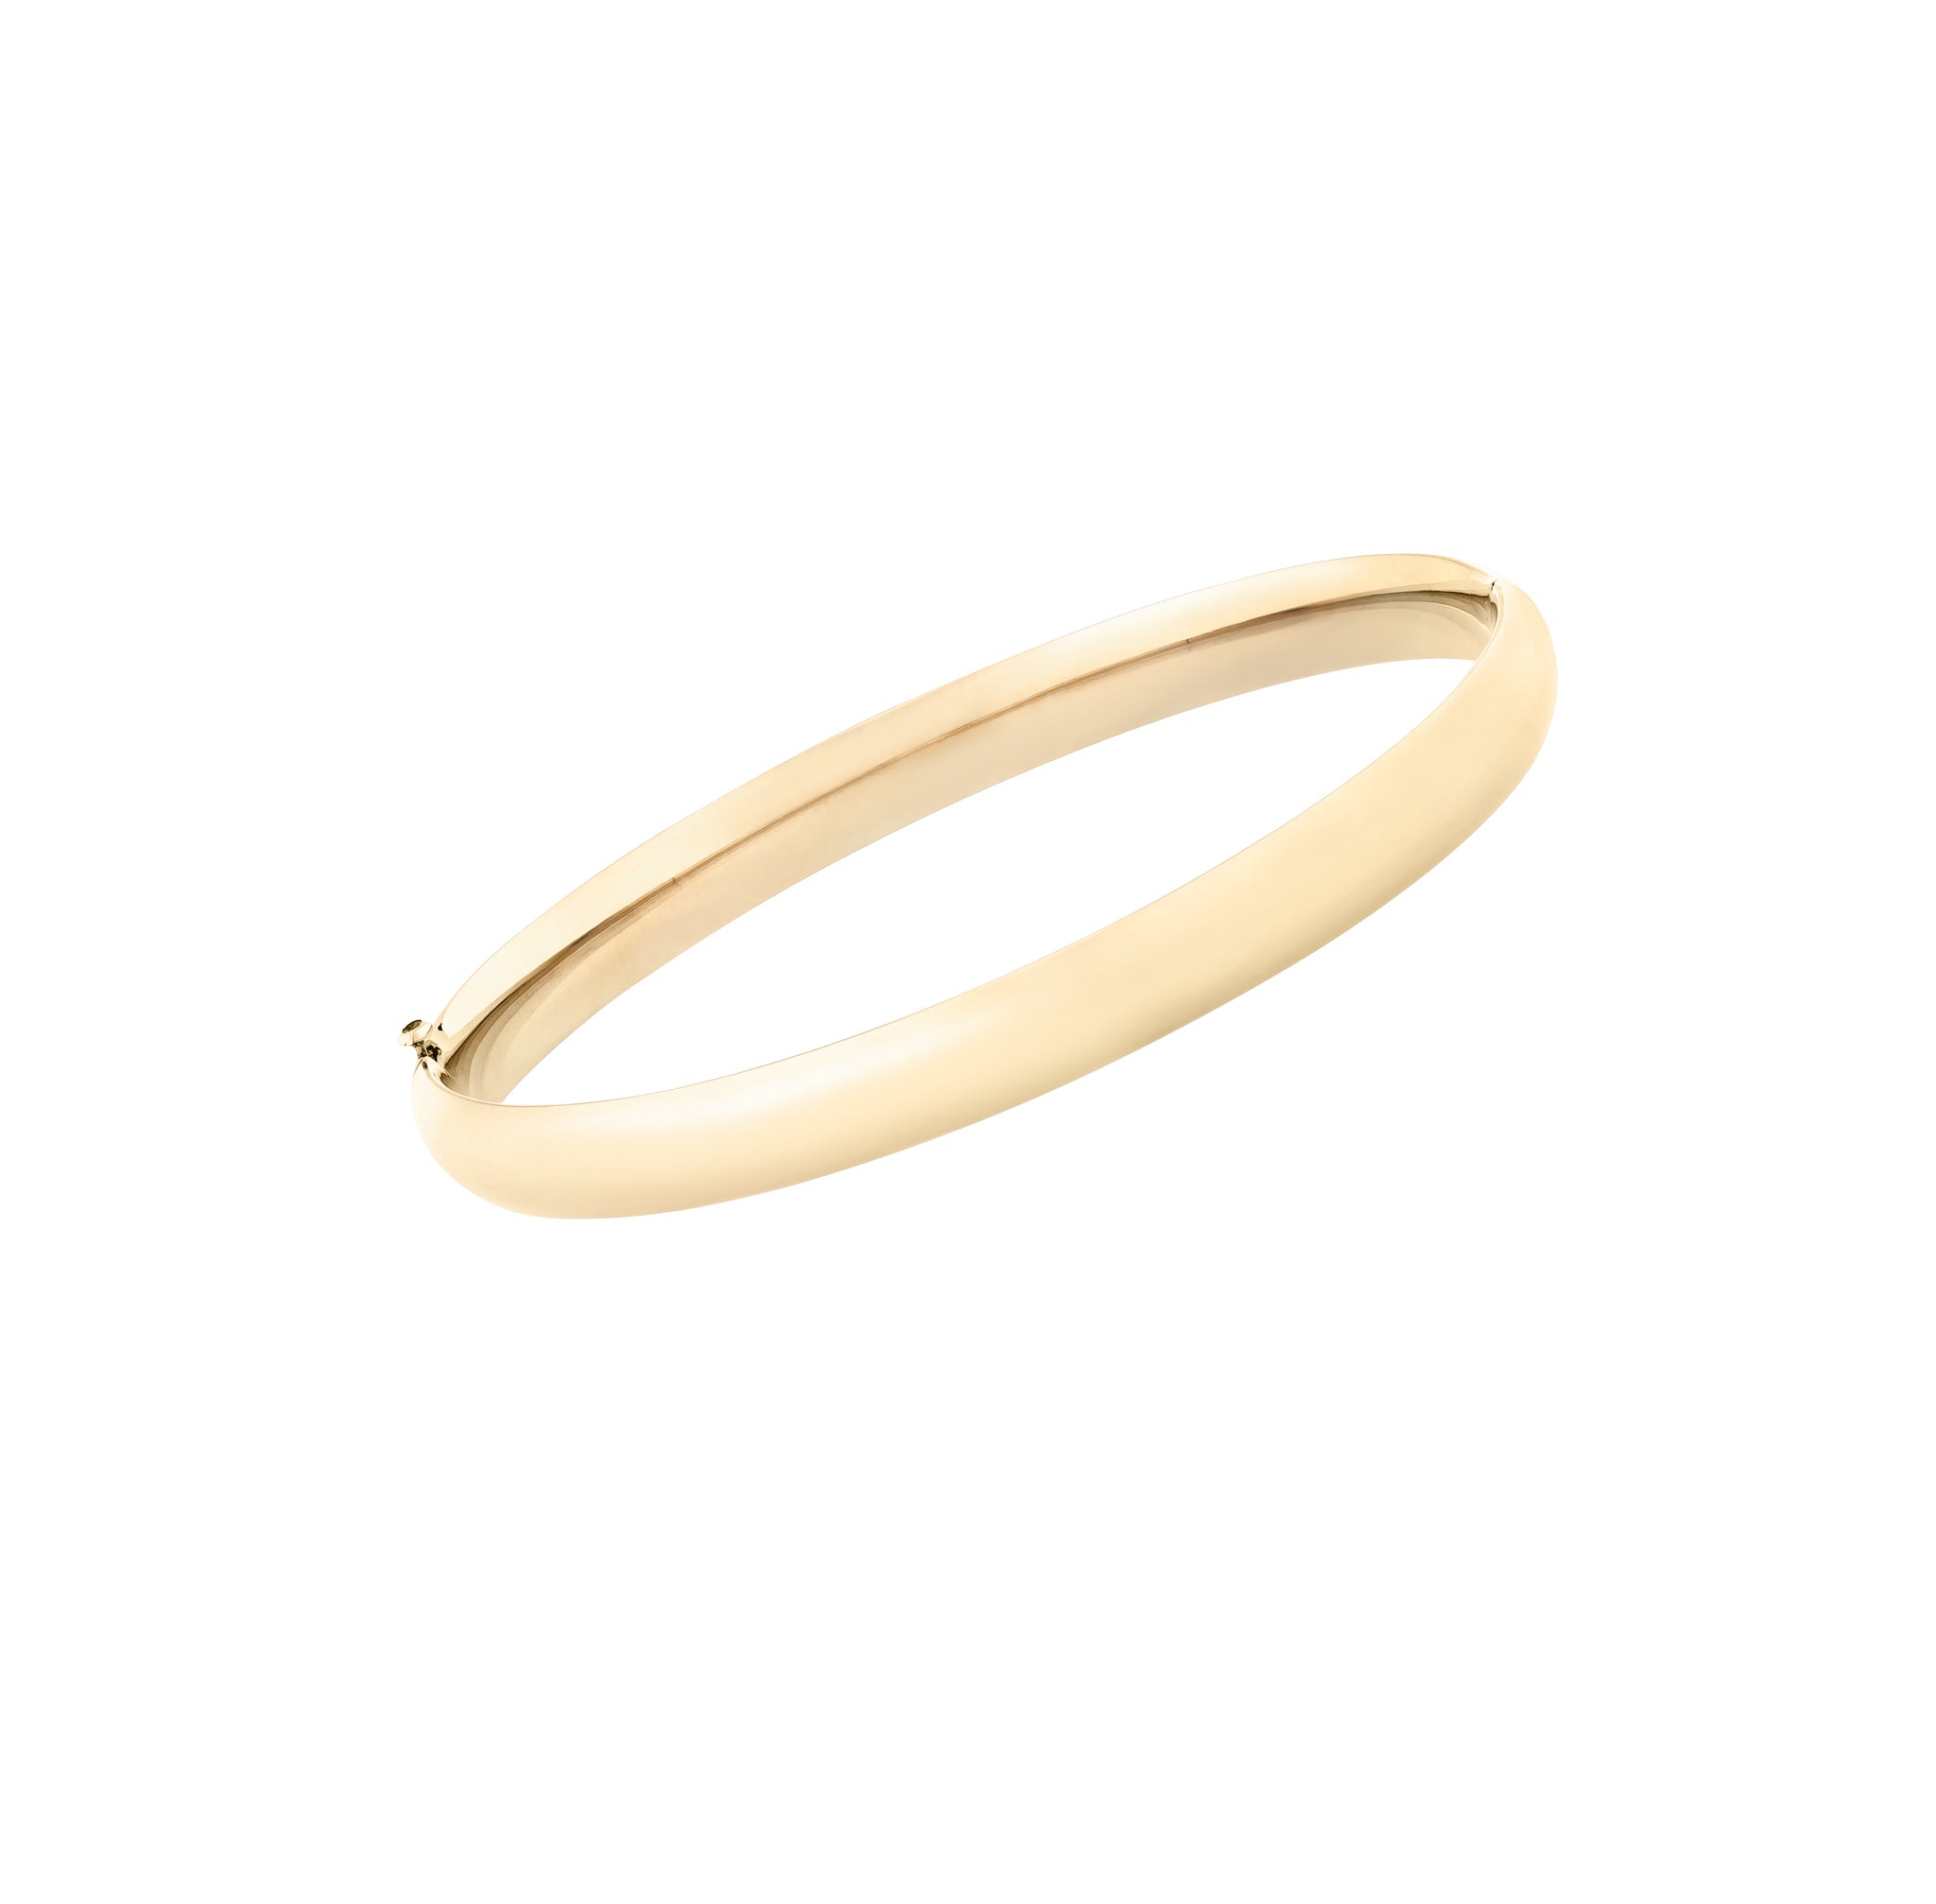 LIFETIME GUARANTEE LG or XL6mm 14K GOLD ep Solid BANGLE Ladies 